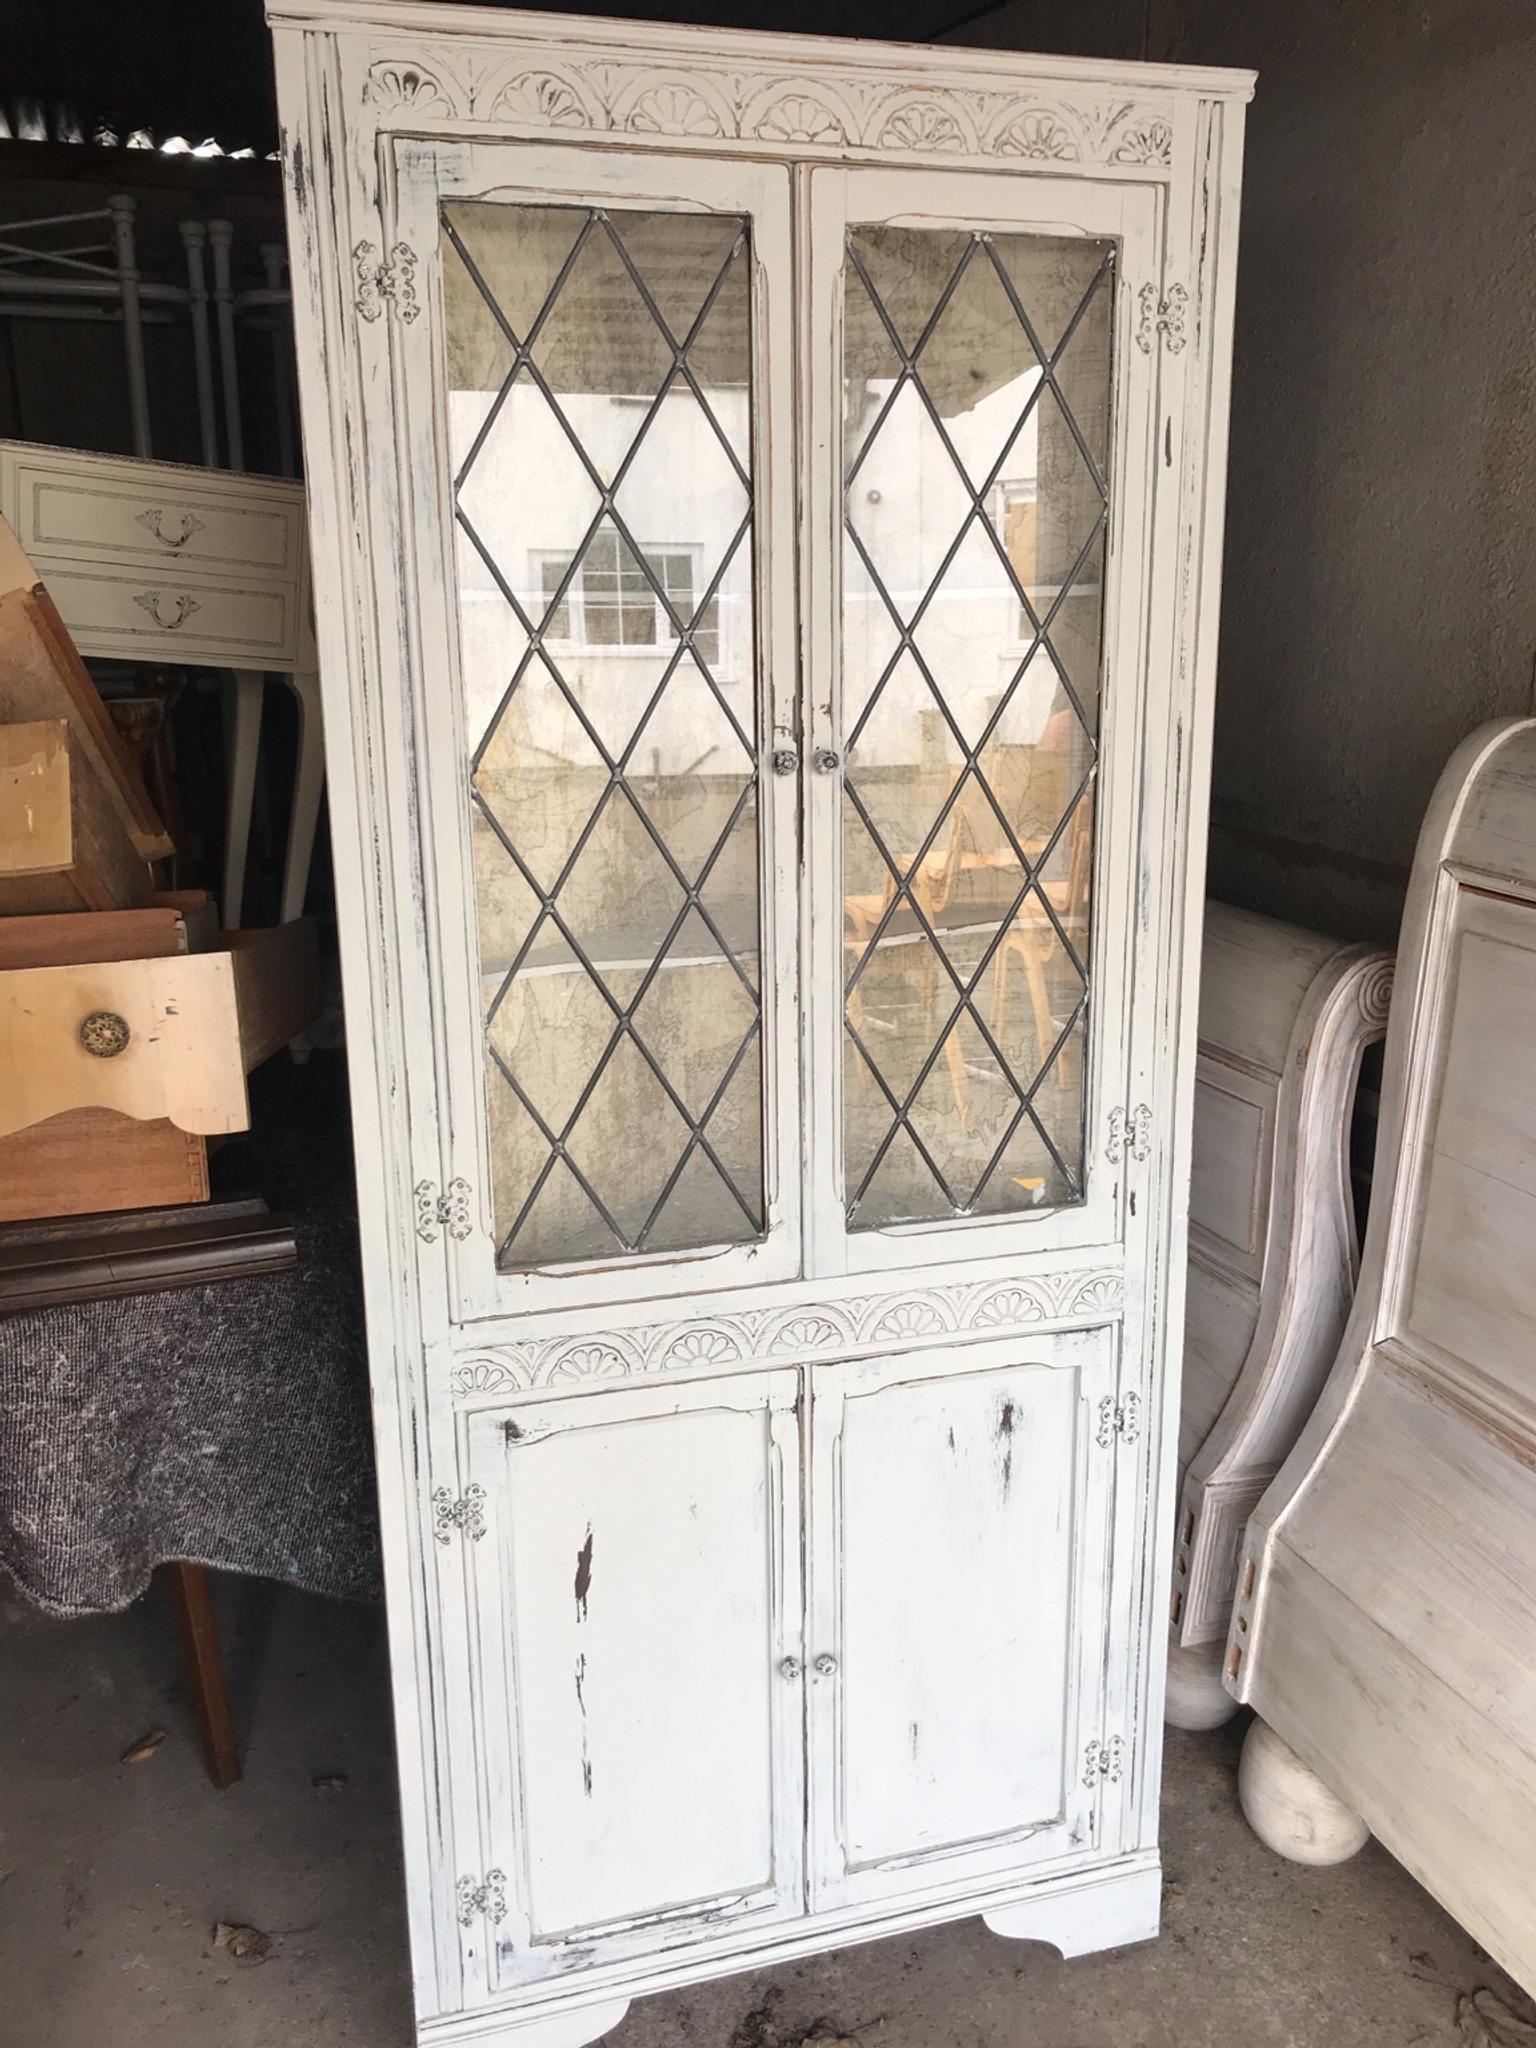 Shabby Chic Upcyle Project Corner Cabinet In B62 Dudley Fur 15 00